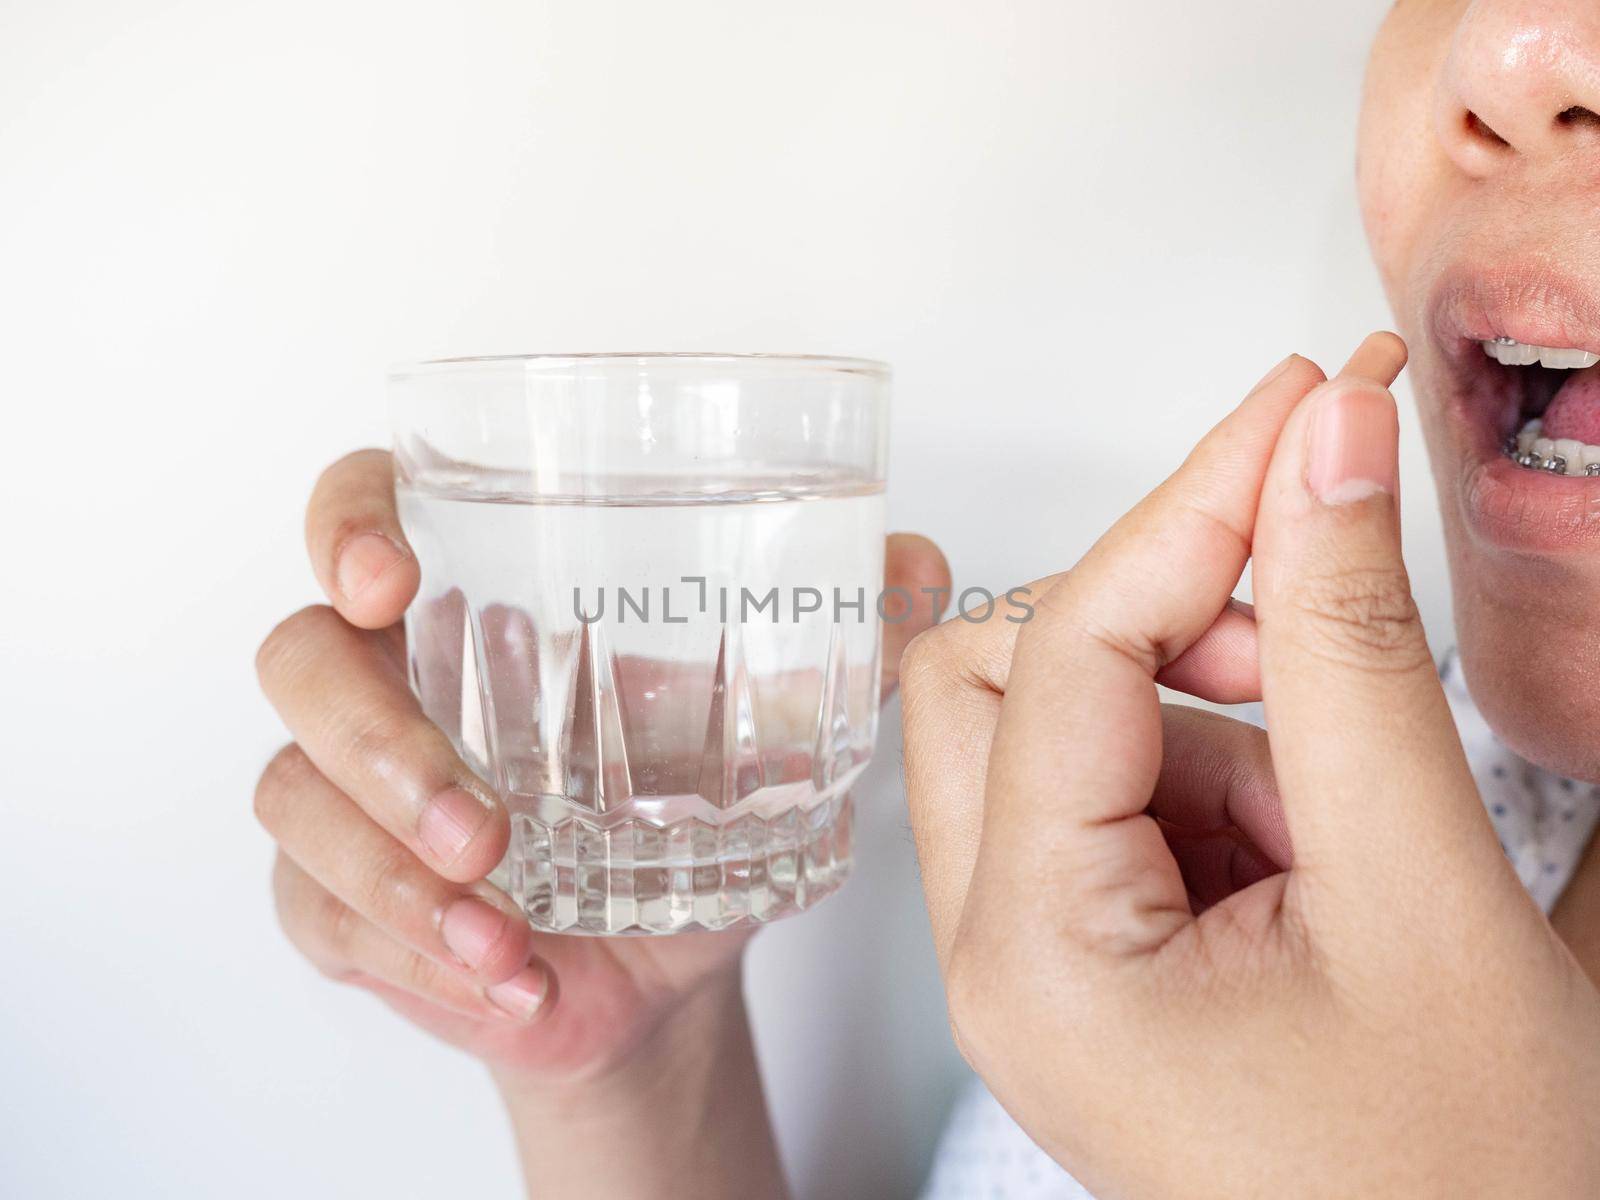 A woman taking a pill into her mouth The other A woman taking a pill into her mouth The other hand holds water. holds water. by Kulpreya